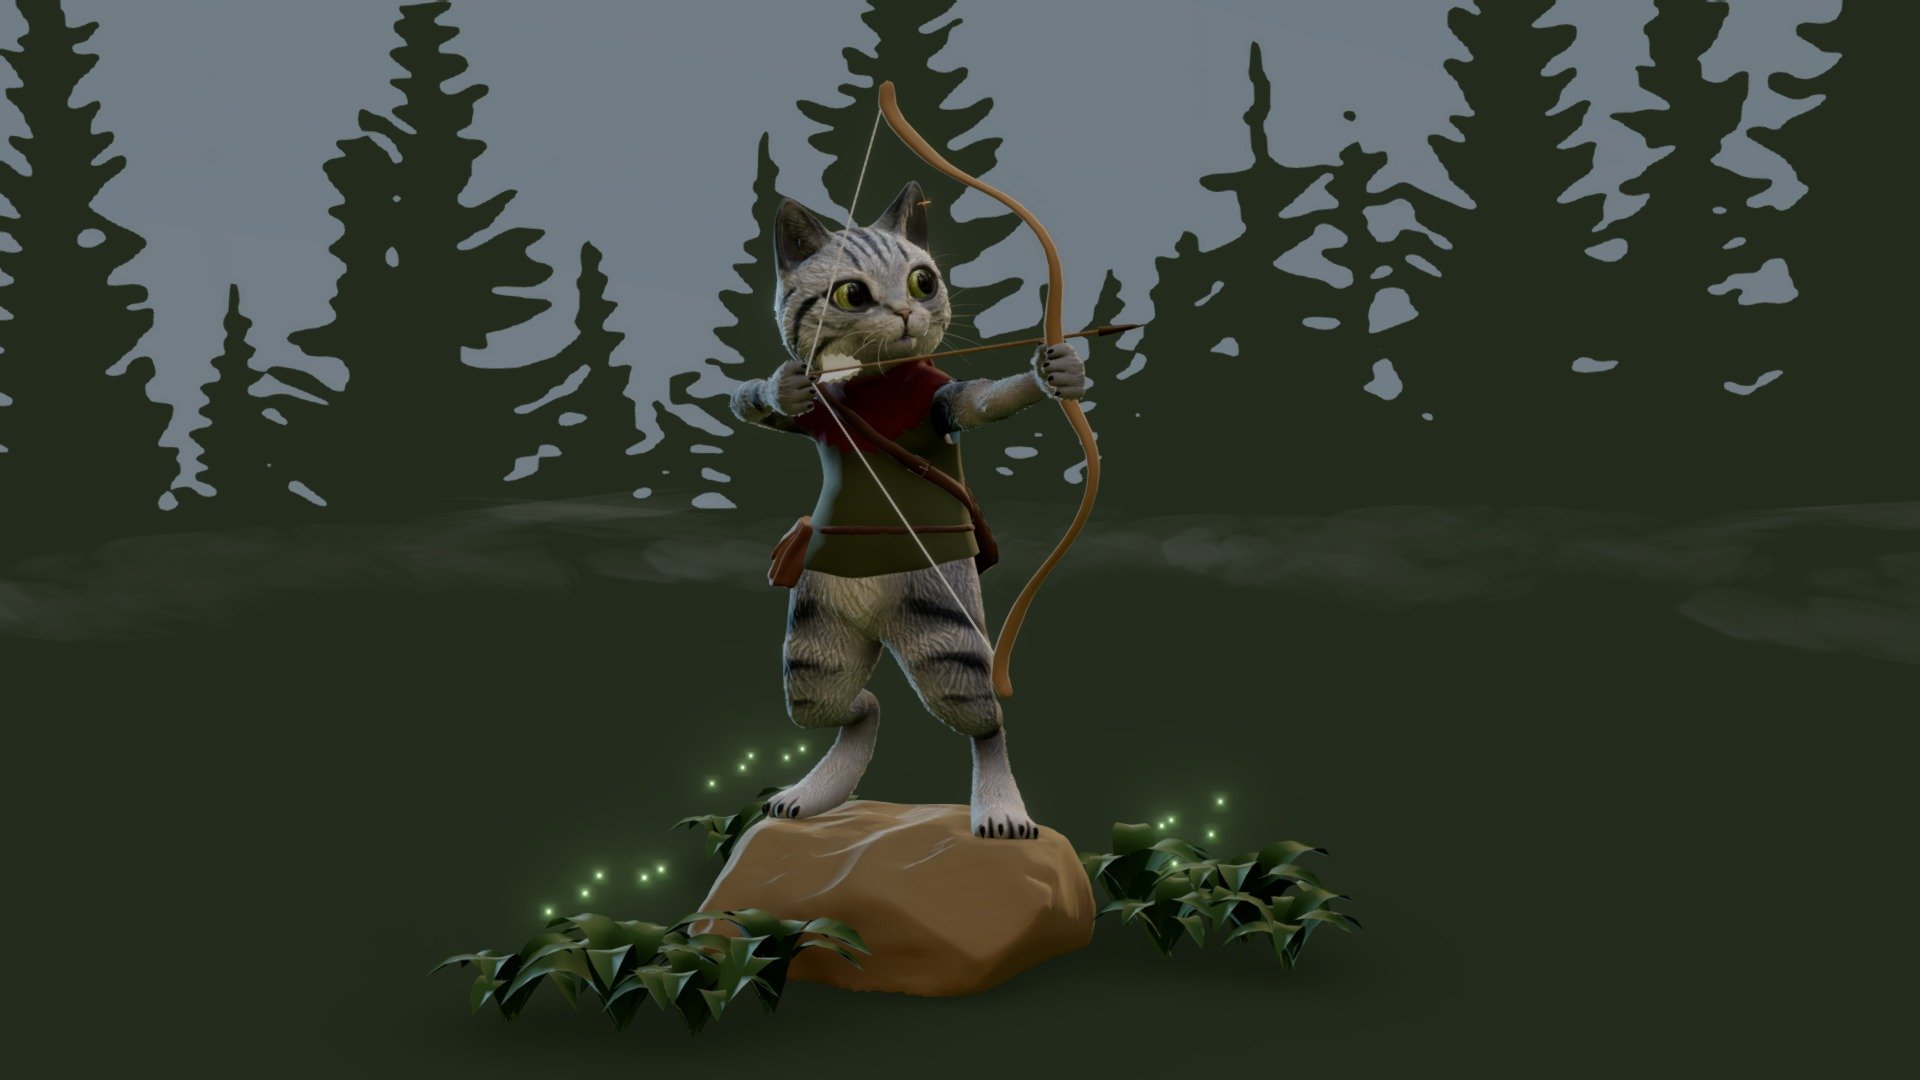 Personal project i made in free time without any concept. Inspired by Monster Hunter World kitties 3d model